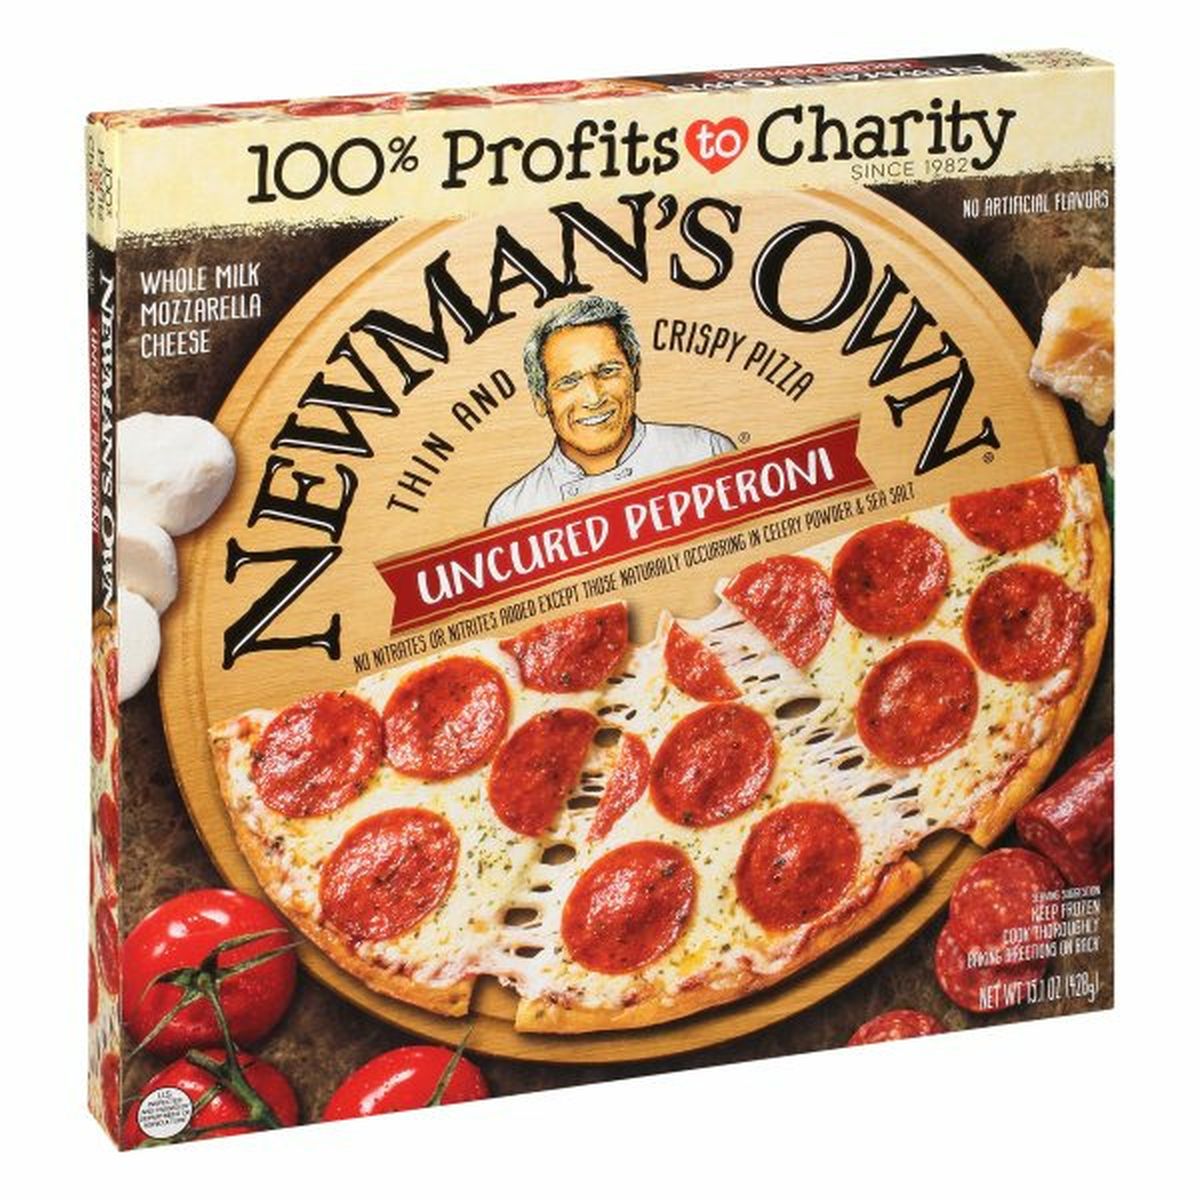 Calories in Newman's Own Pizza, Thin and Crispy, Uncured Pepperoni